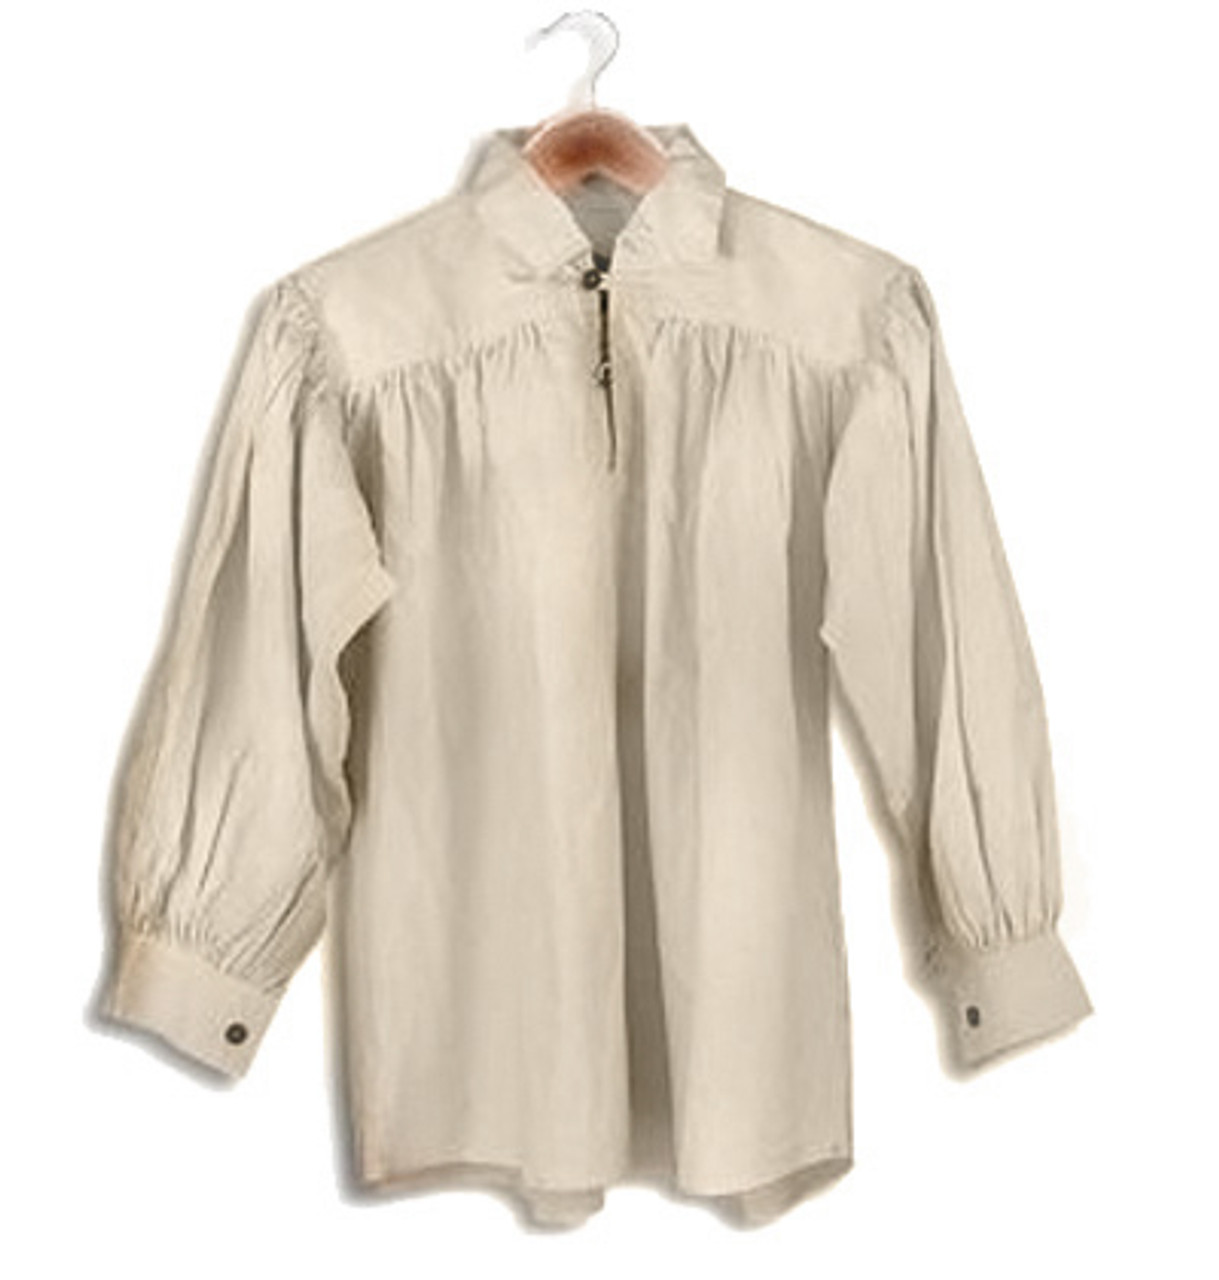 Medieval Collared Shirt - Renstore